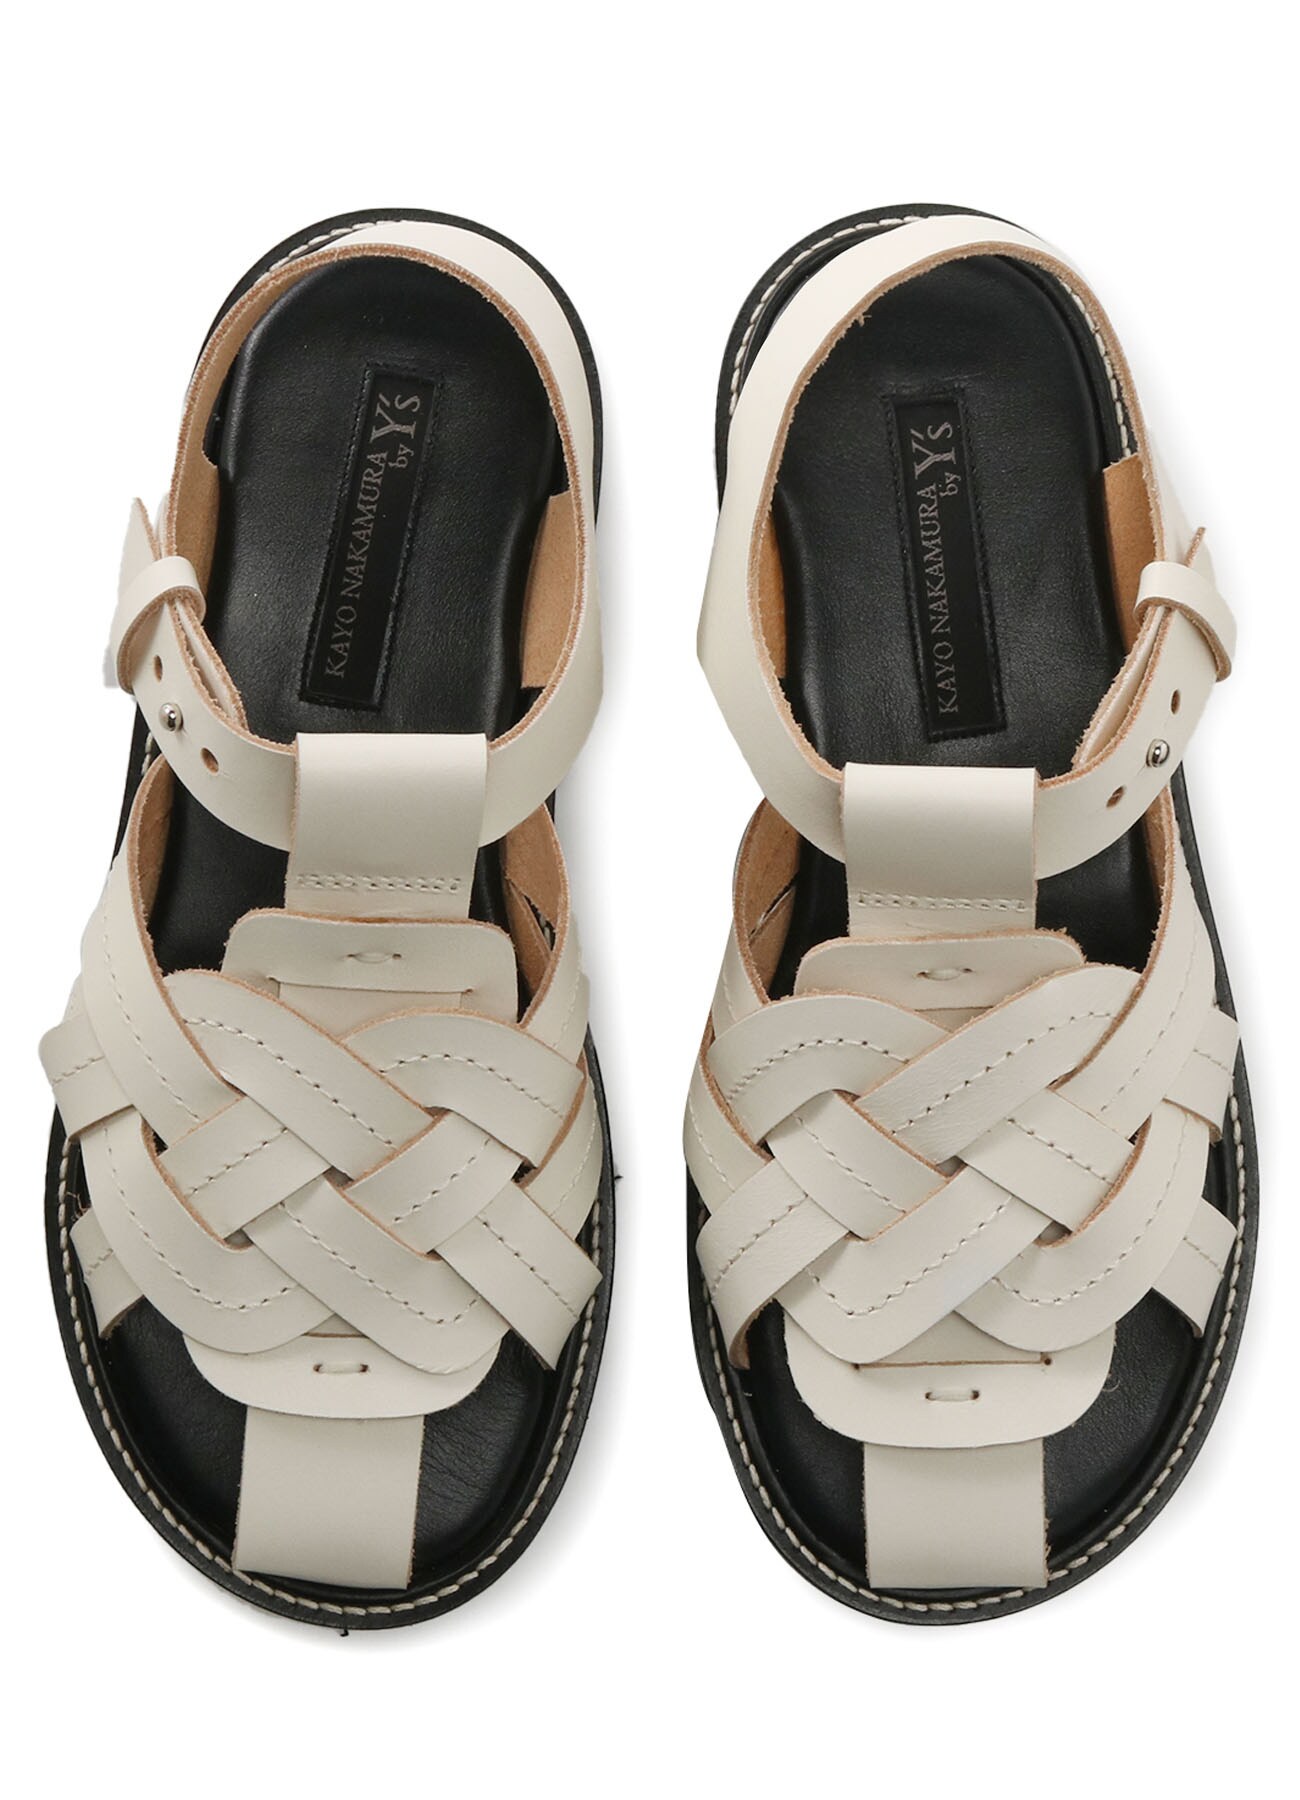 THICK NUME LEATHER A KNITTED SANDALS